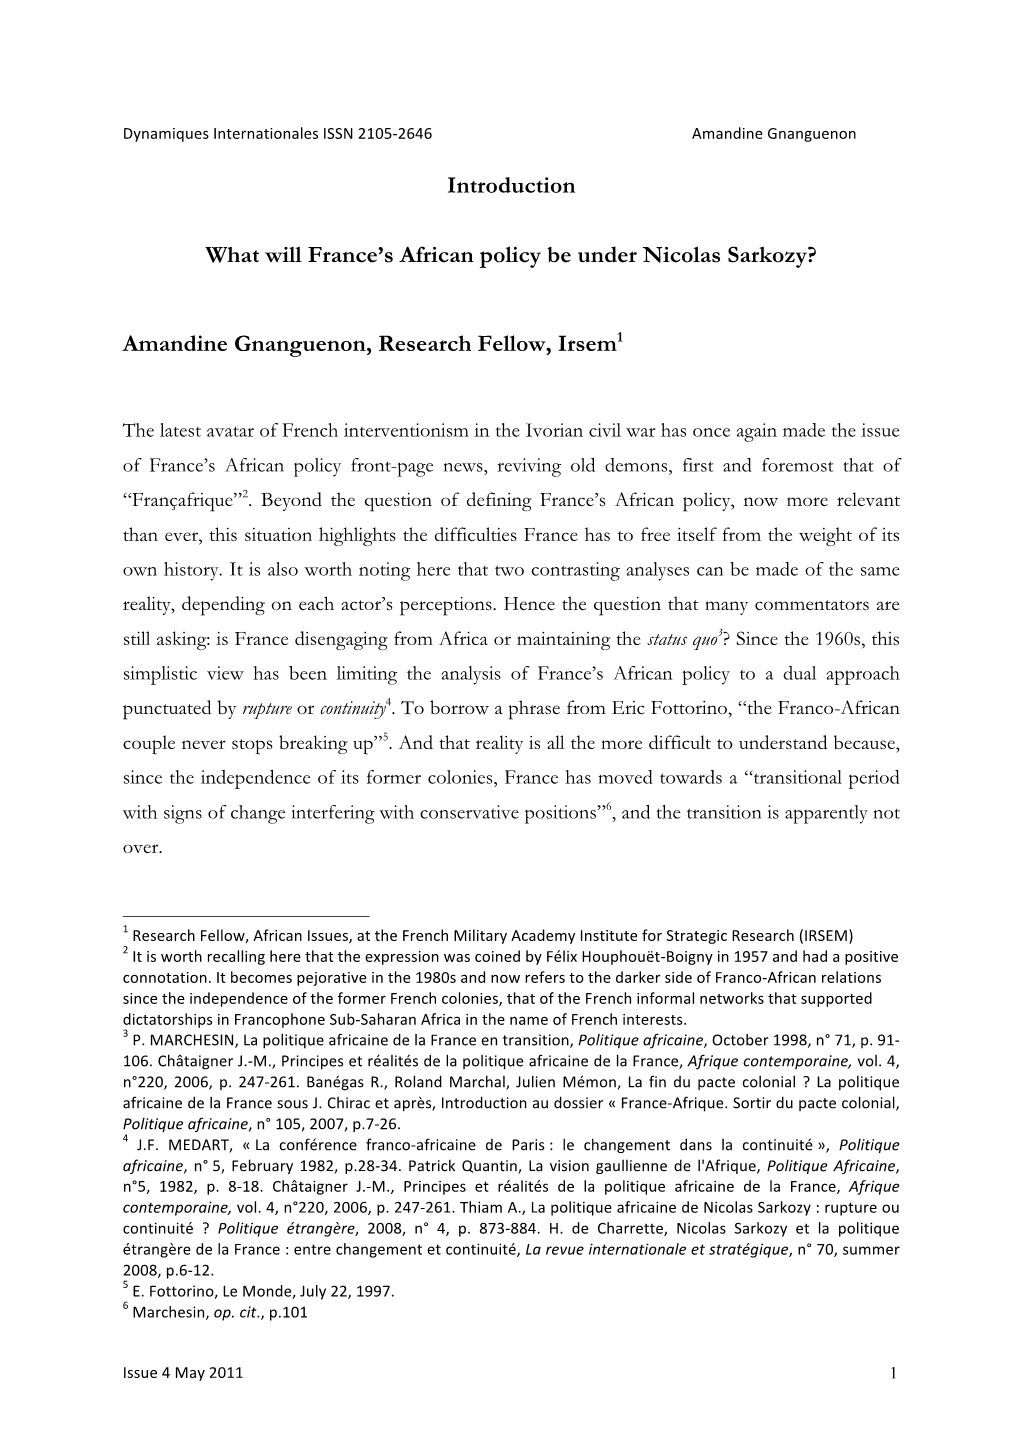 Introduction What Will France's African Policy Be Under Nicolas